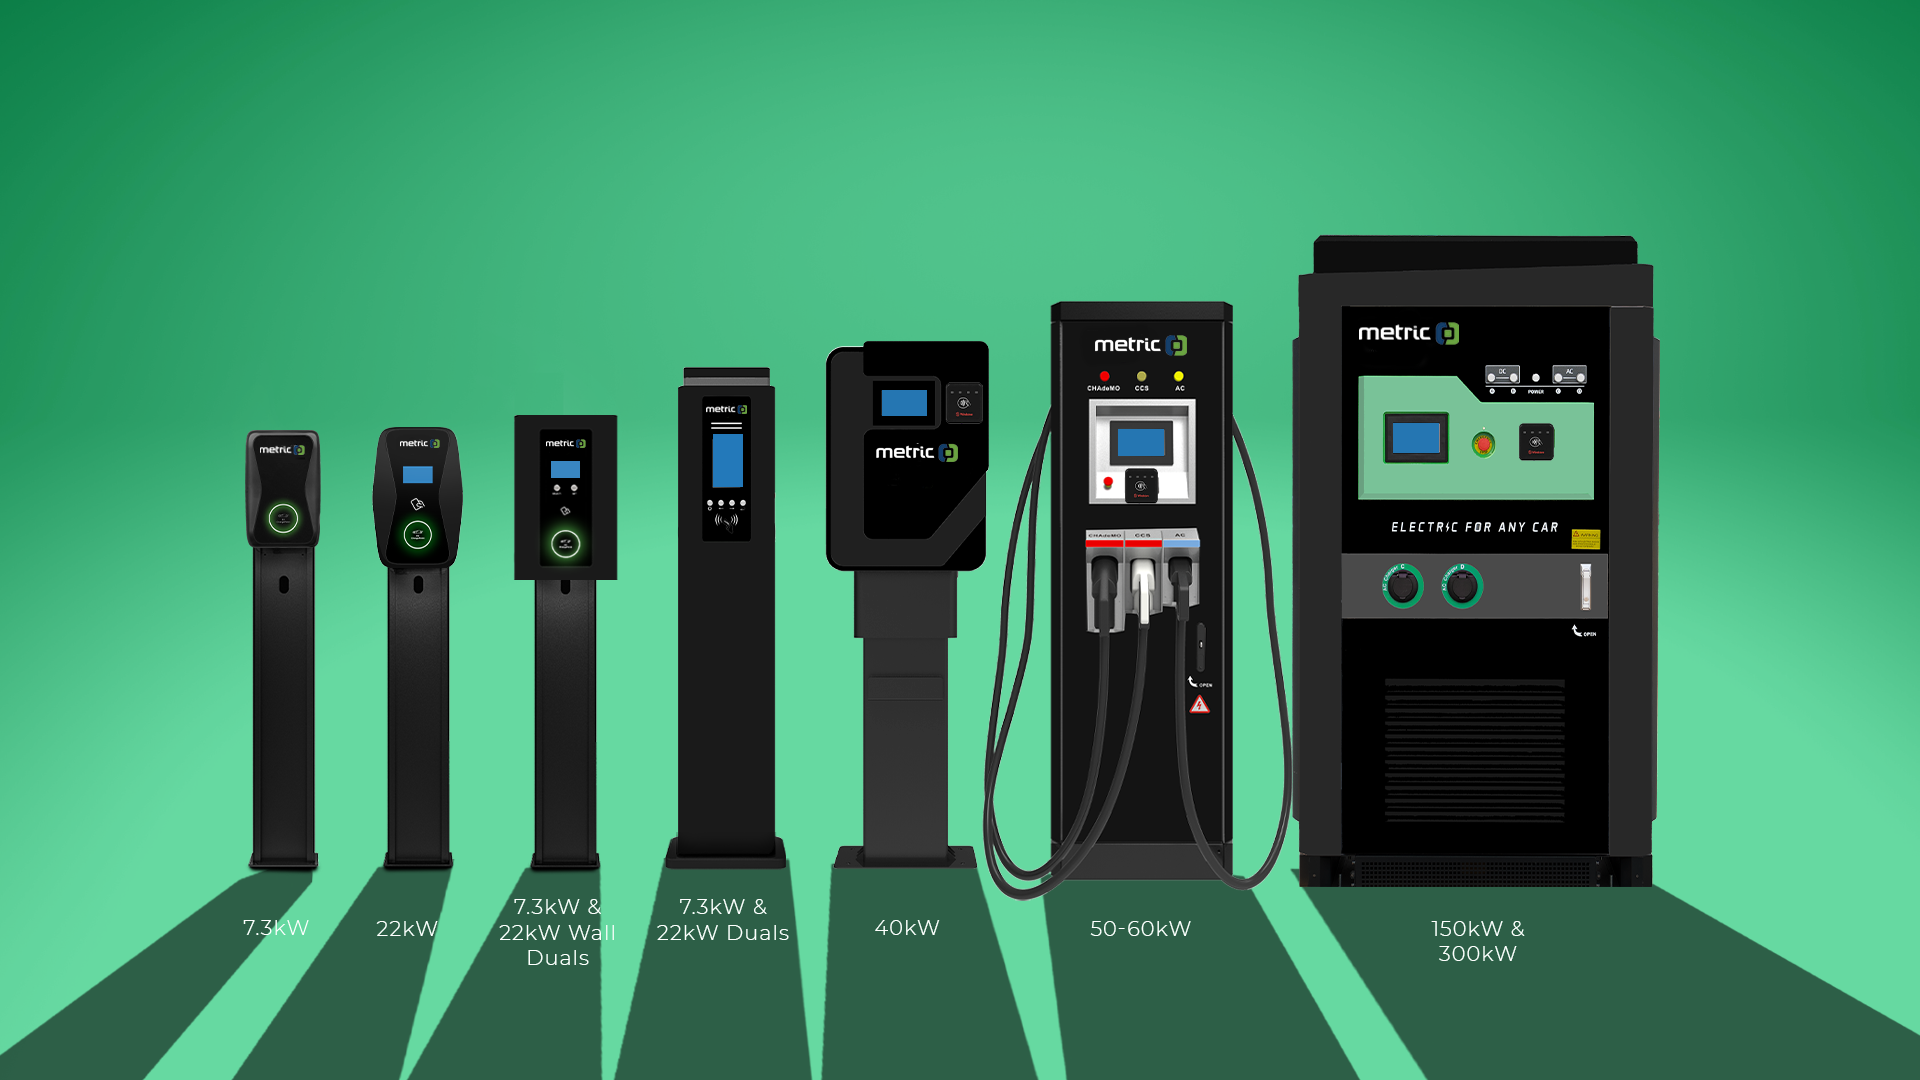 https://e-vehicleinfo.com/types-of-electric-vehicle-chargers-in-india-ev-charger/